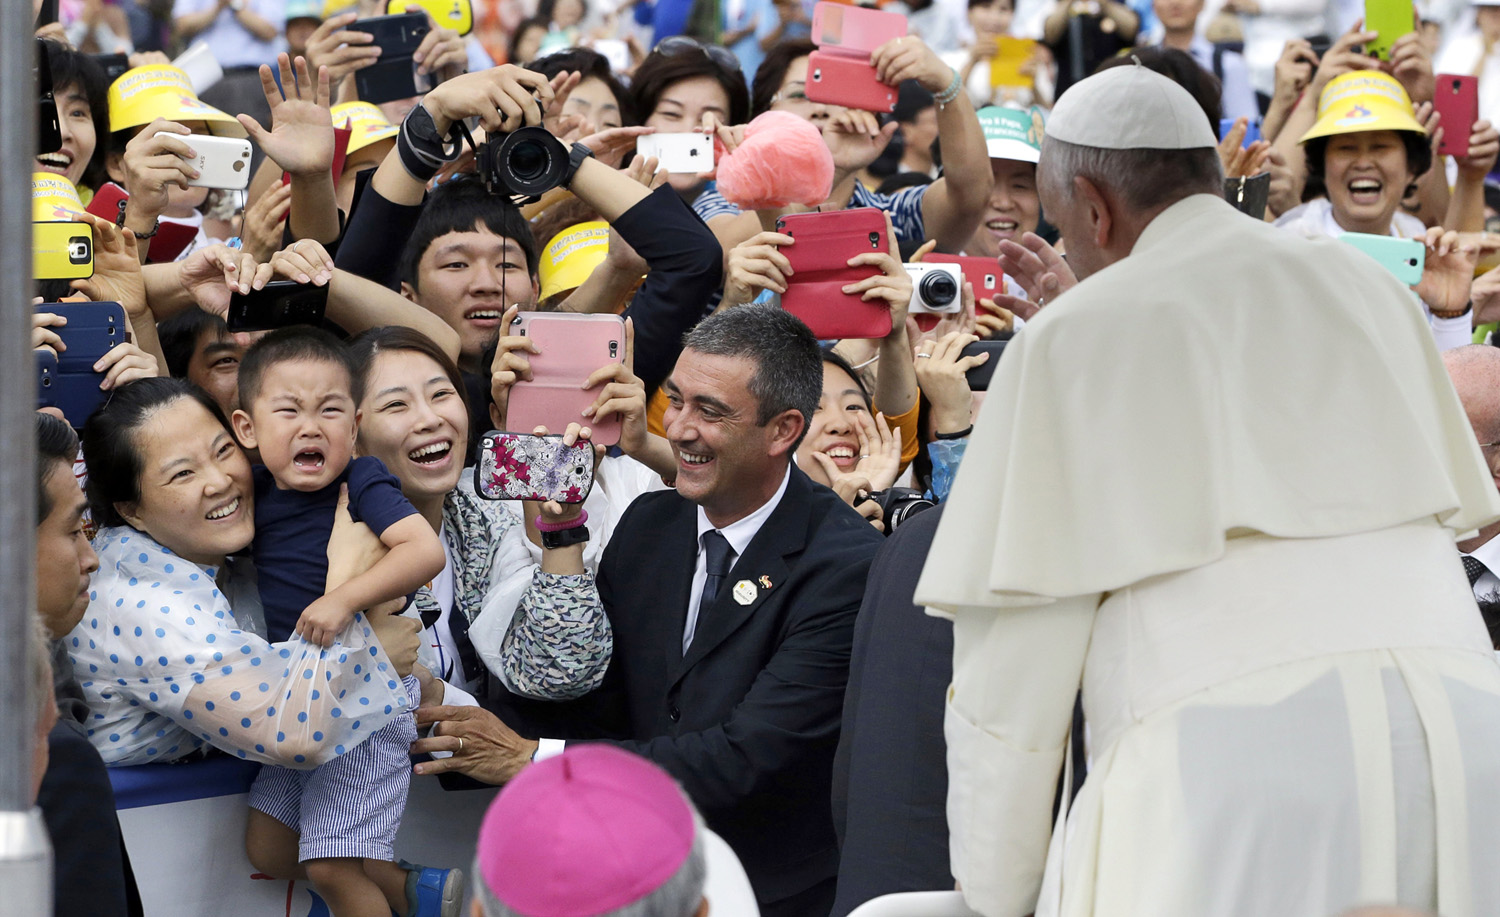 The Pope gives his blessings as he arrives Aug. 17 for a Mass in the town of Haemi, south of South Korea’s capital, Seoul (Lee Jin-man—AP)